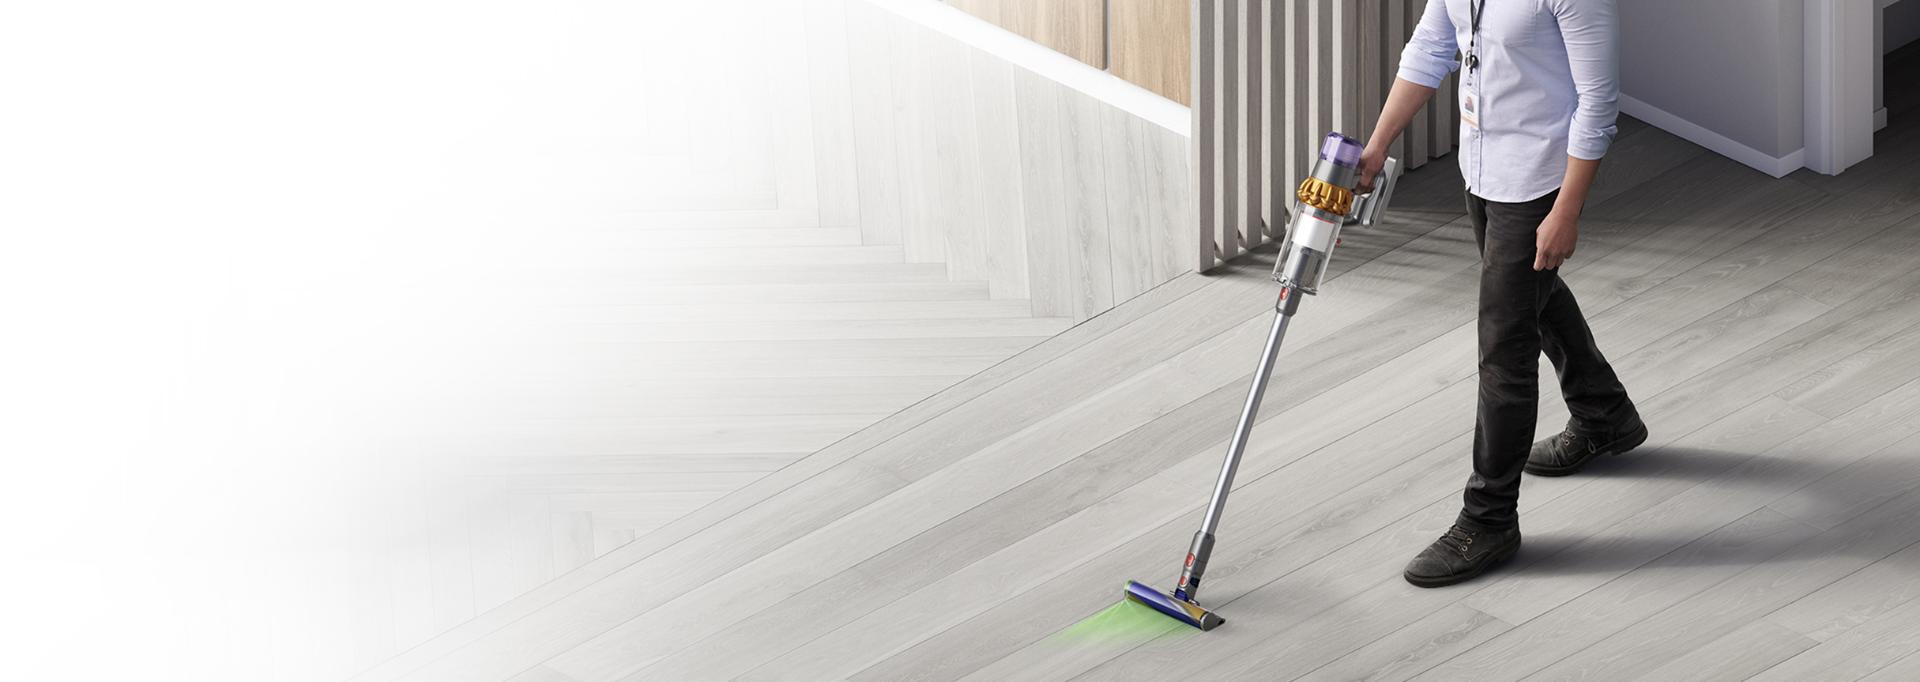 Man cleaning work space with Dyson cordless vacuum